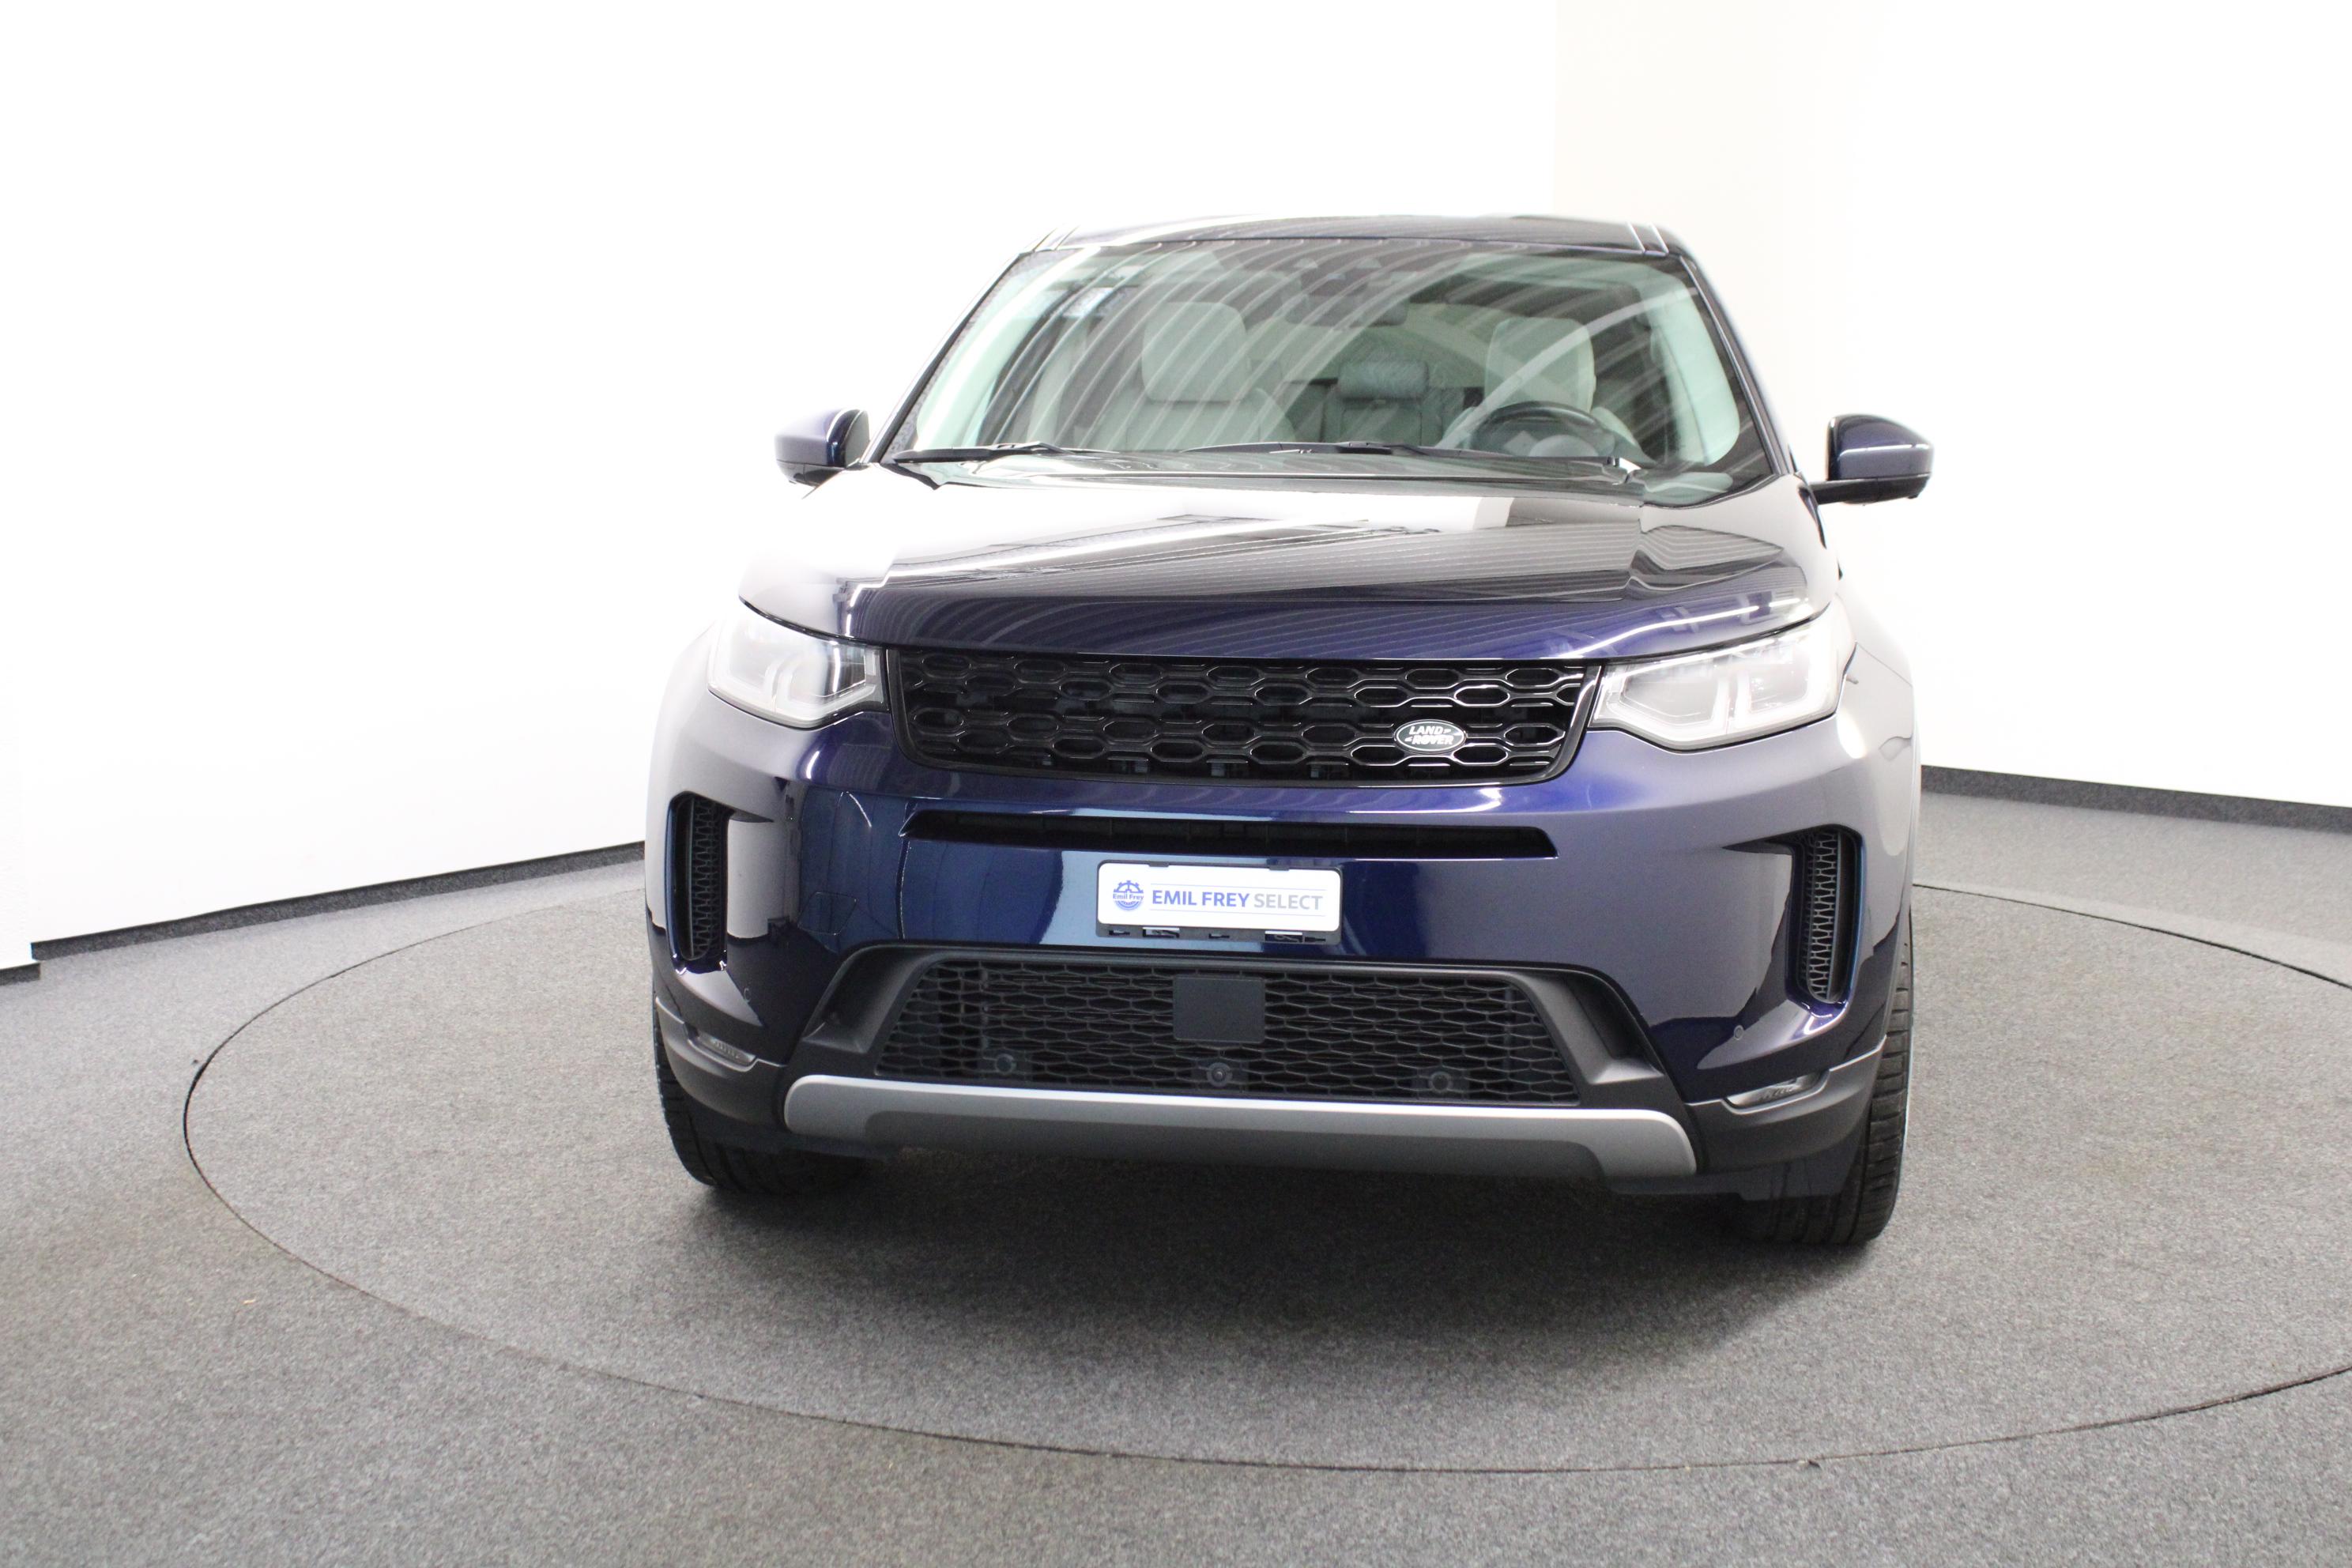 Land Rover Led Willkommen Licht Range Rover Discovery 3 4